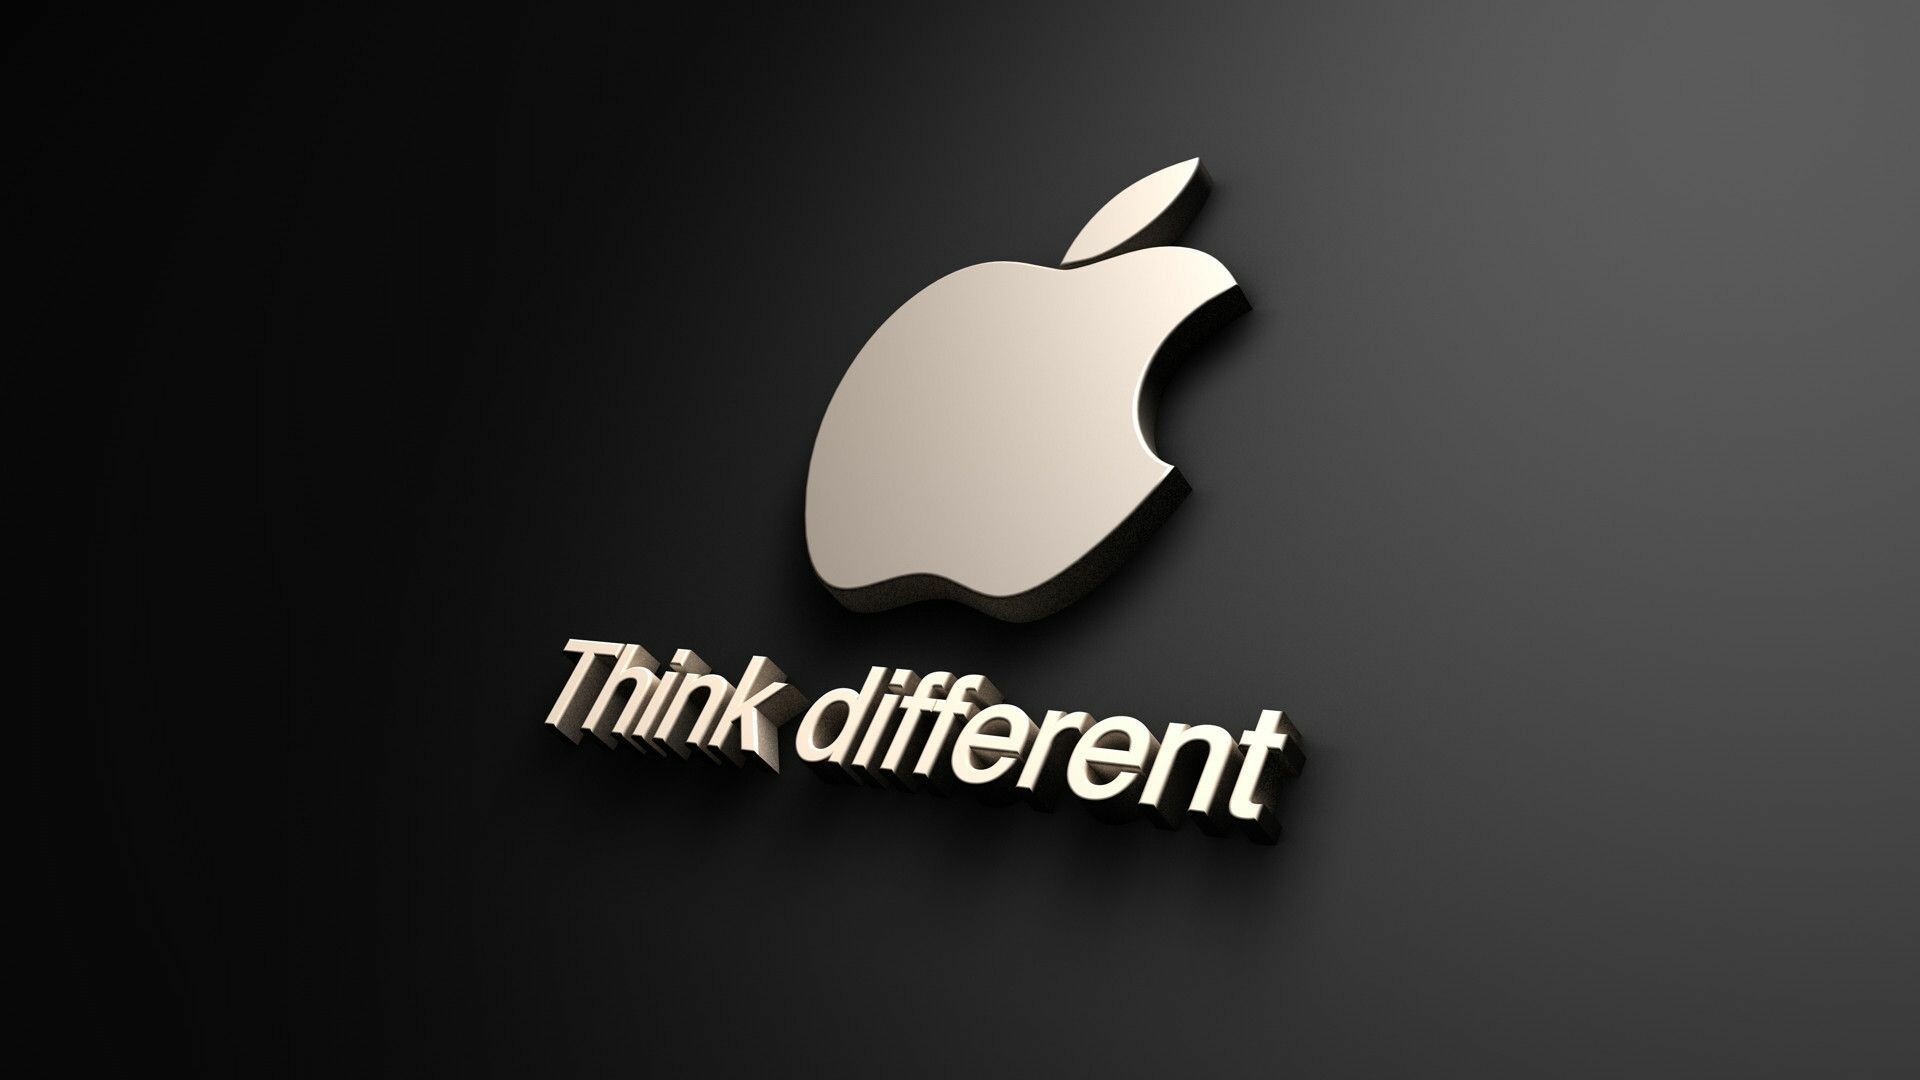 Apple Logo: “Think different”, An advertising slogan used from 1997 to 2002. 1920x1080 Full HD Background.